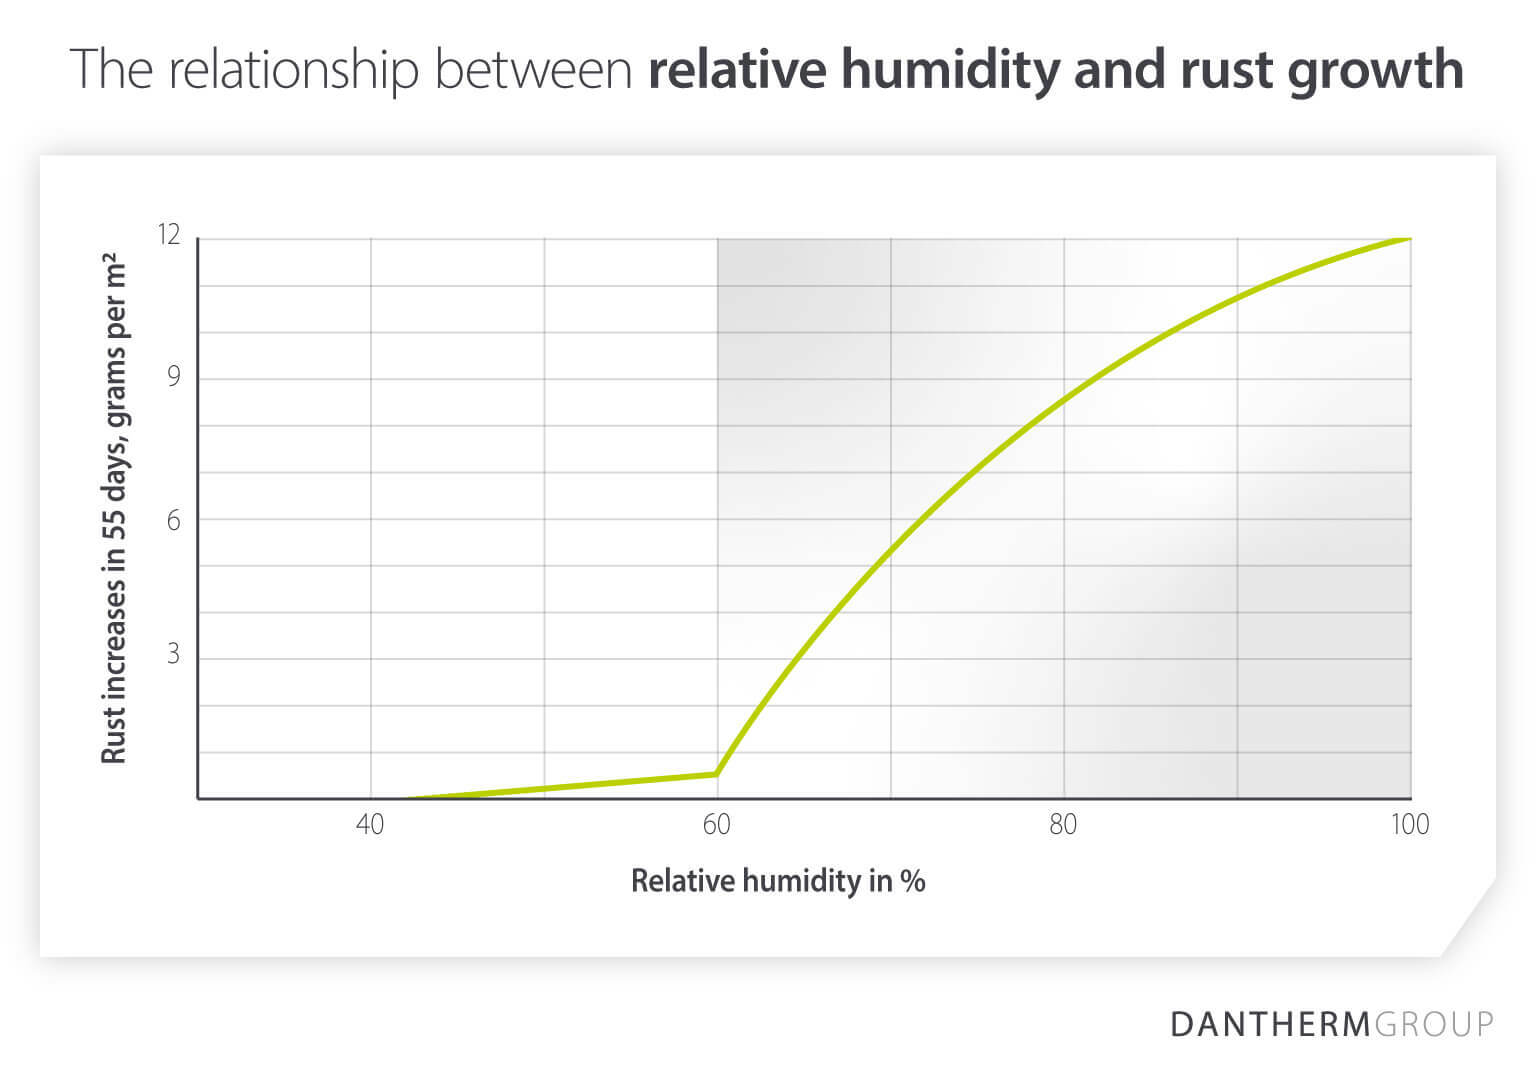 The relationship between relative humidity and rust growth